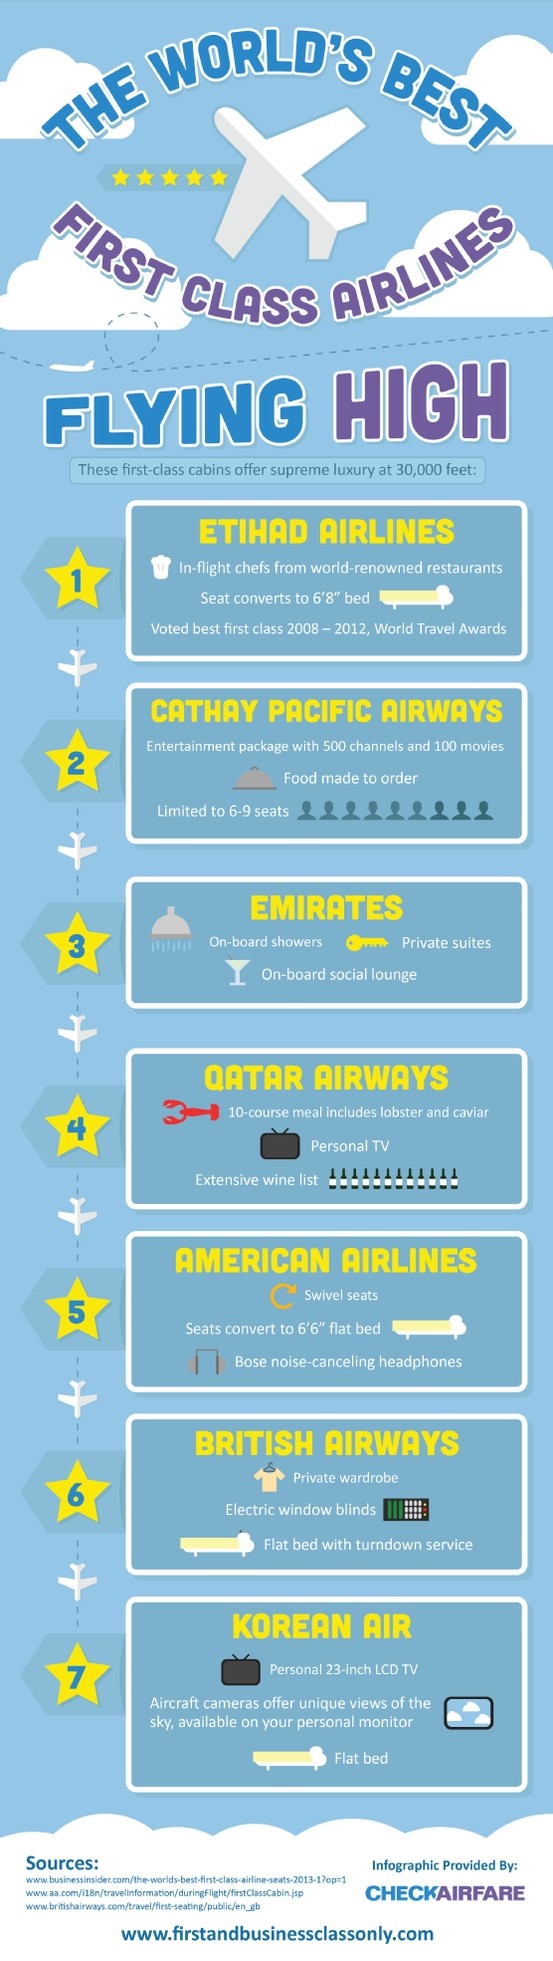 Which airline has the best first class?